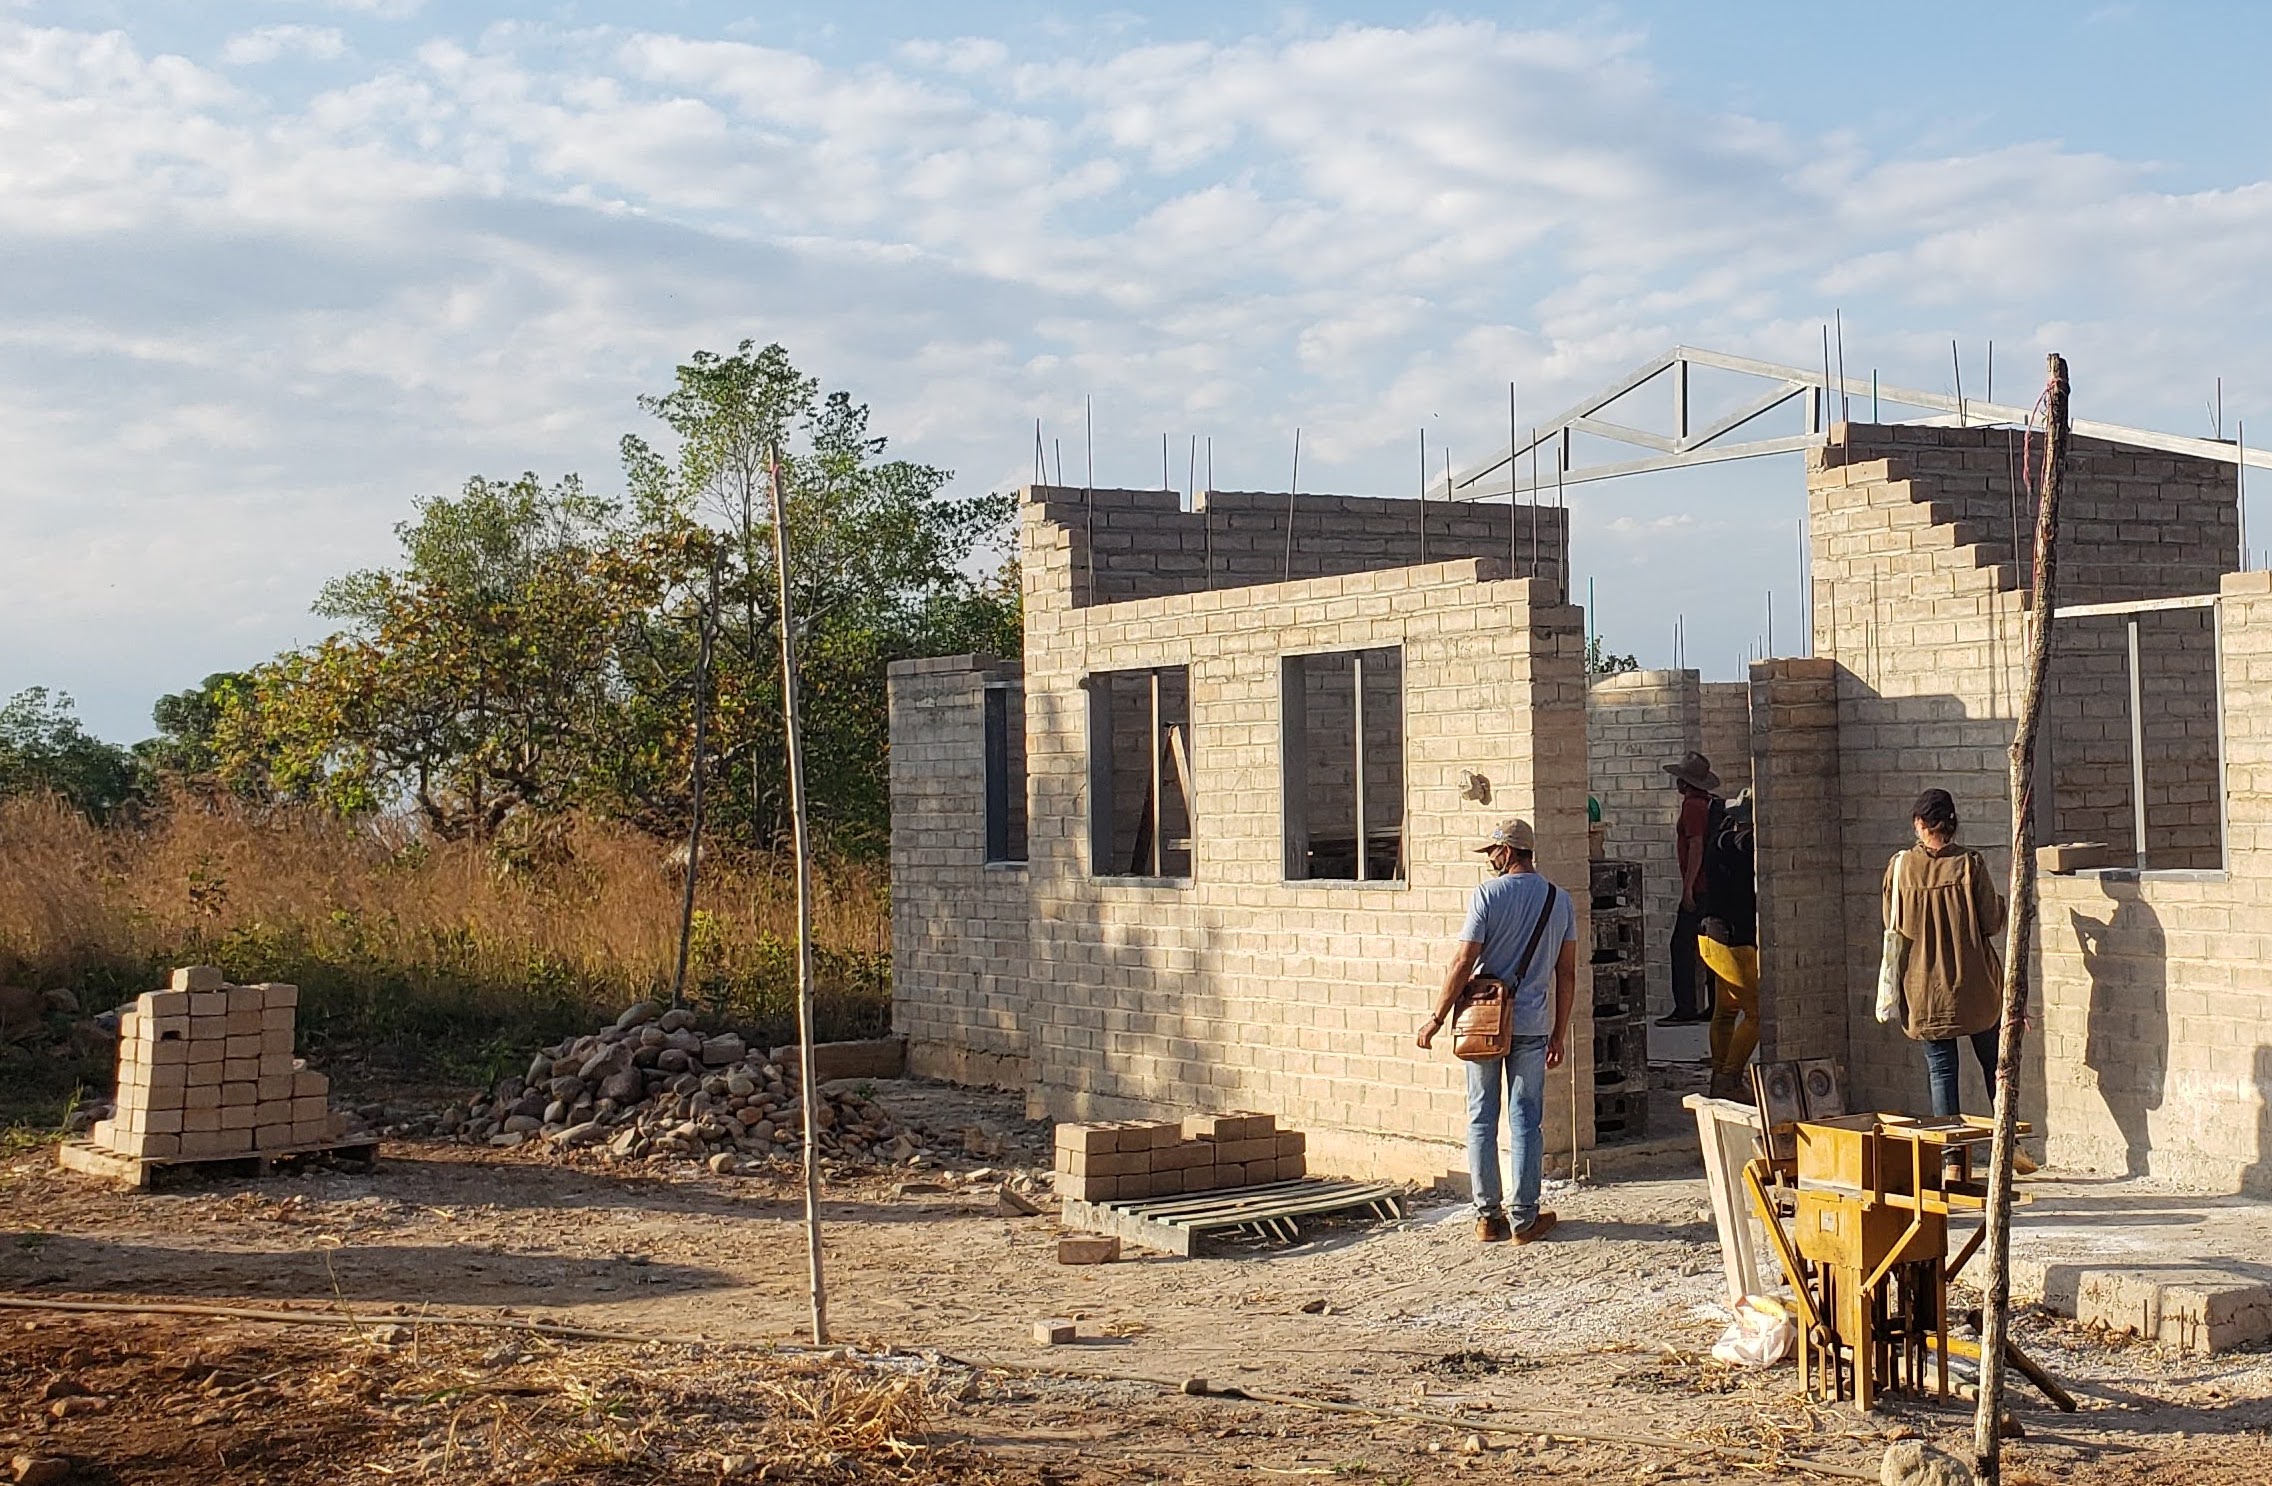 Mutual aid housing cooperative under construction by ex-combatants in Tierragrata, Colombia, 2021